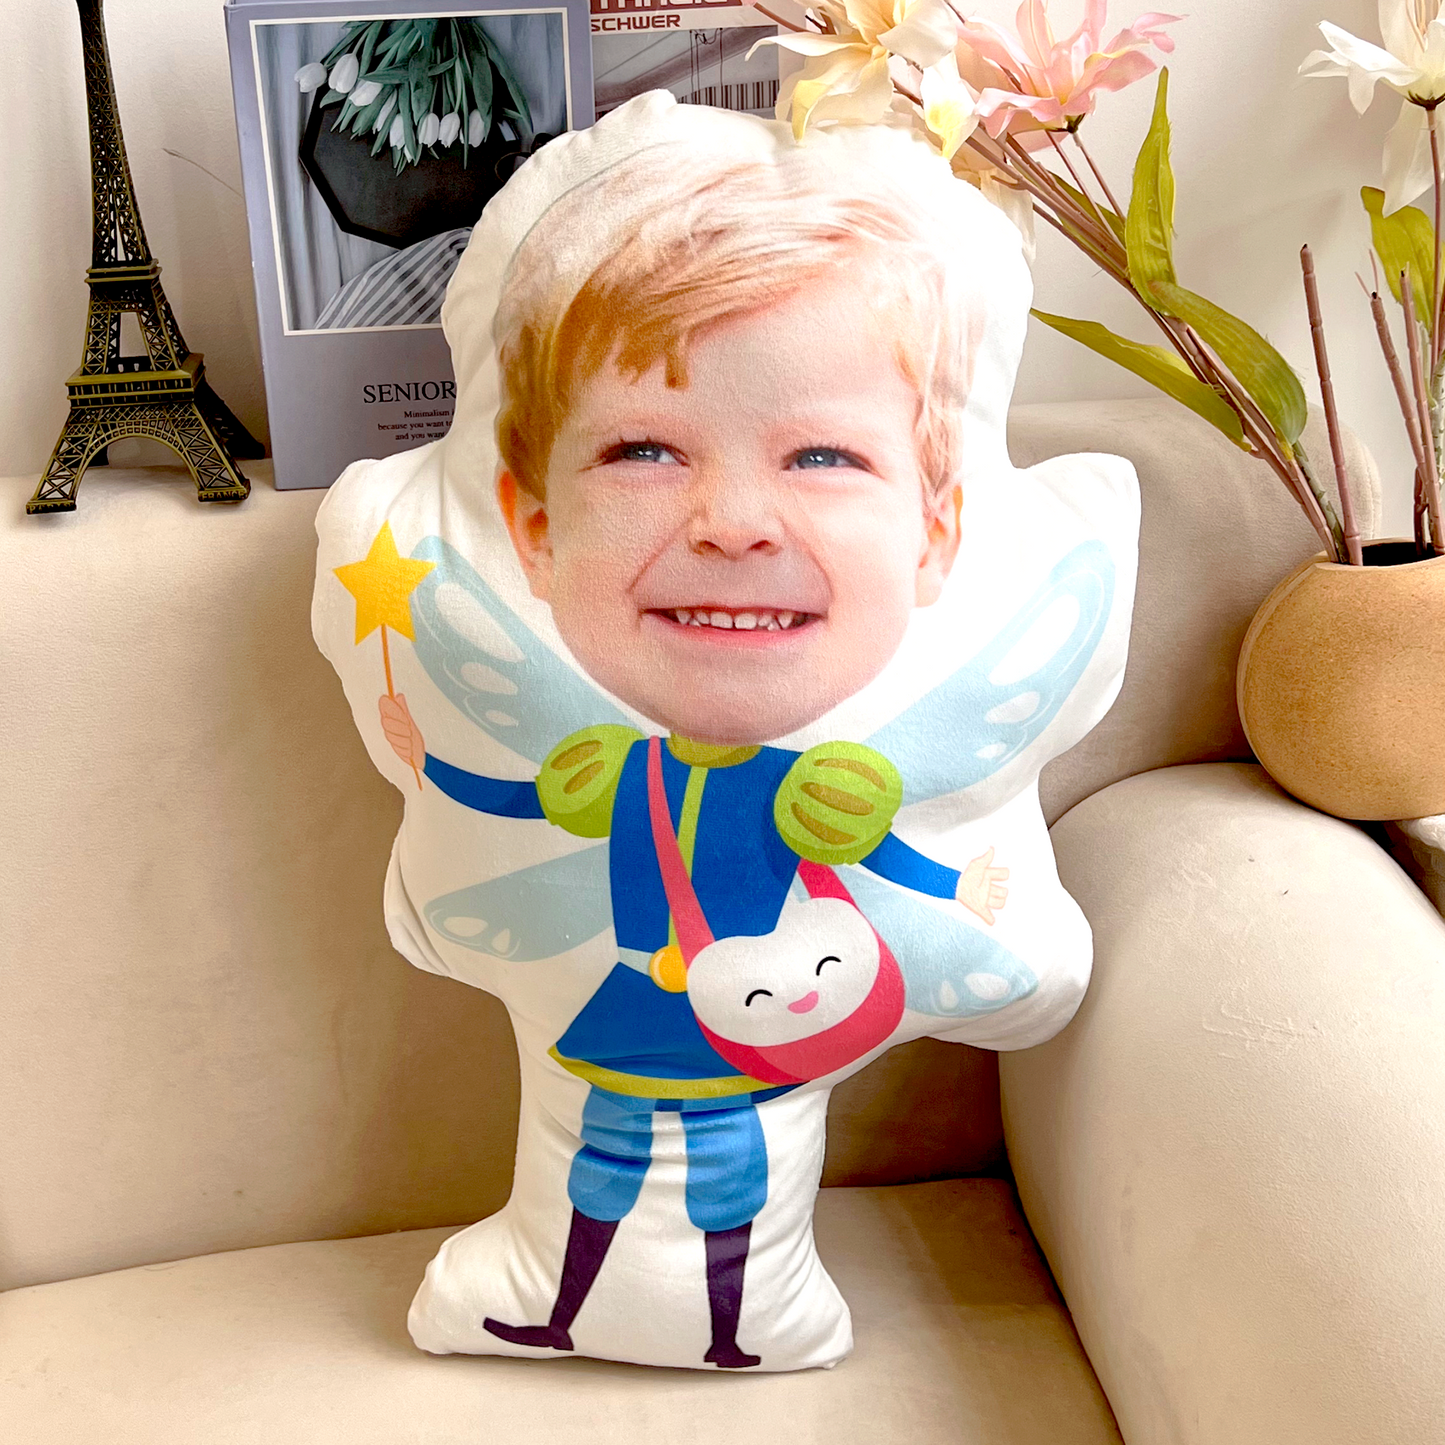 Adorable Kids Wear Tooth Fairy Costume - Personalized Photo Custom Shaped Pillow